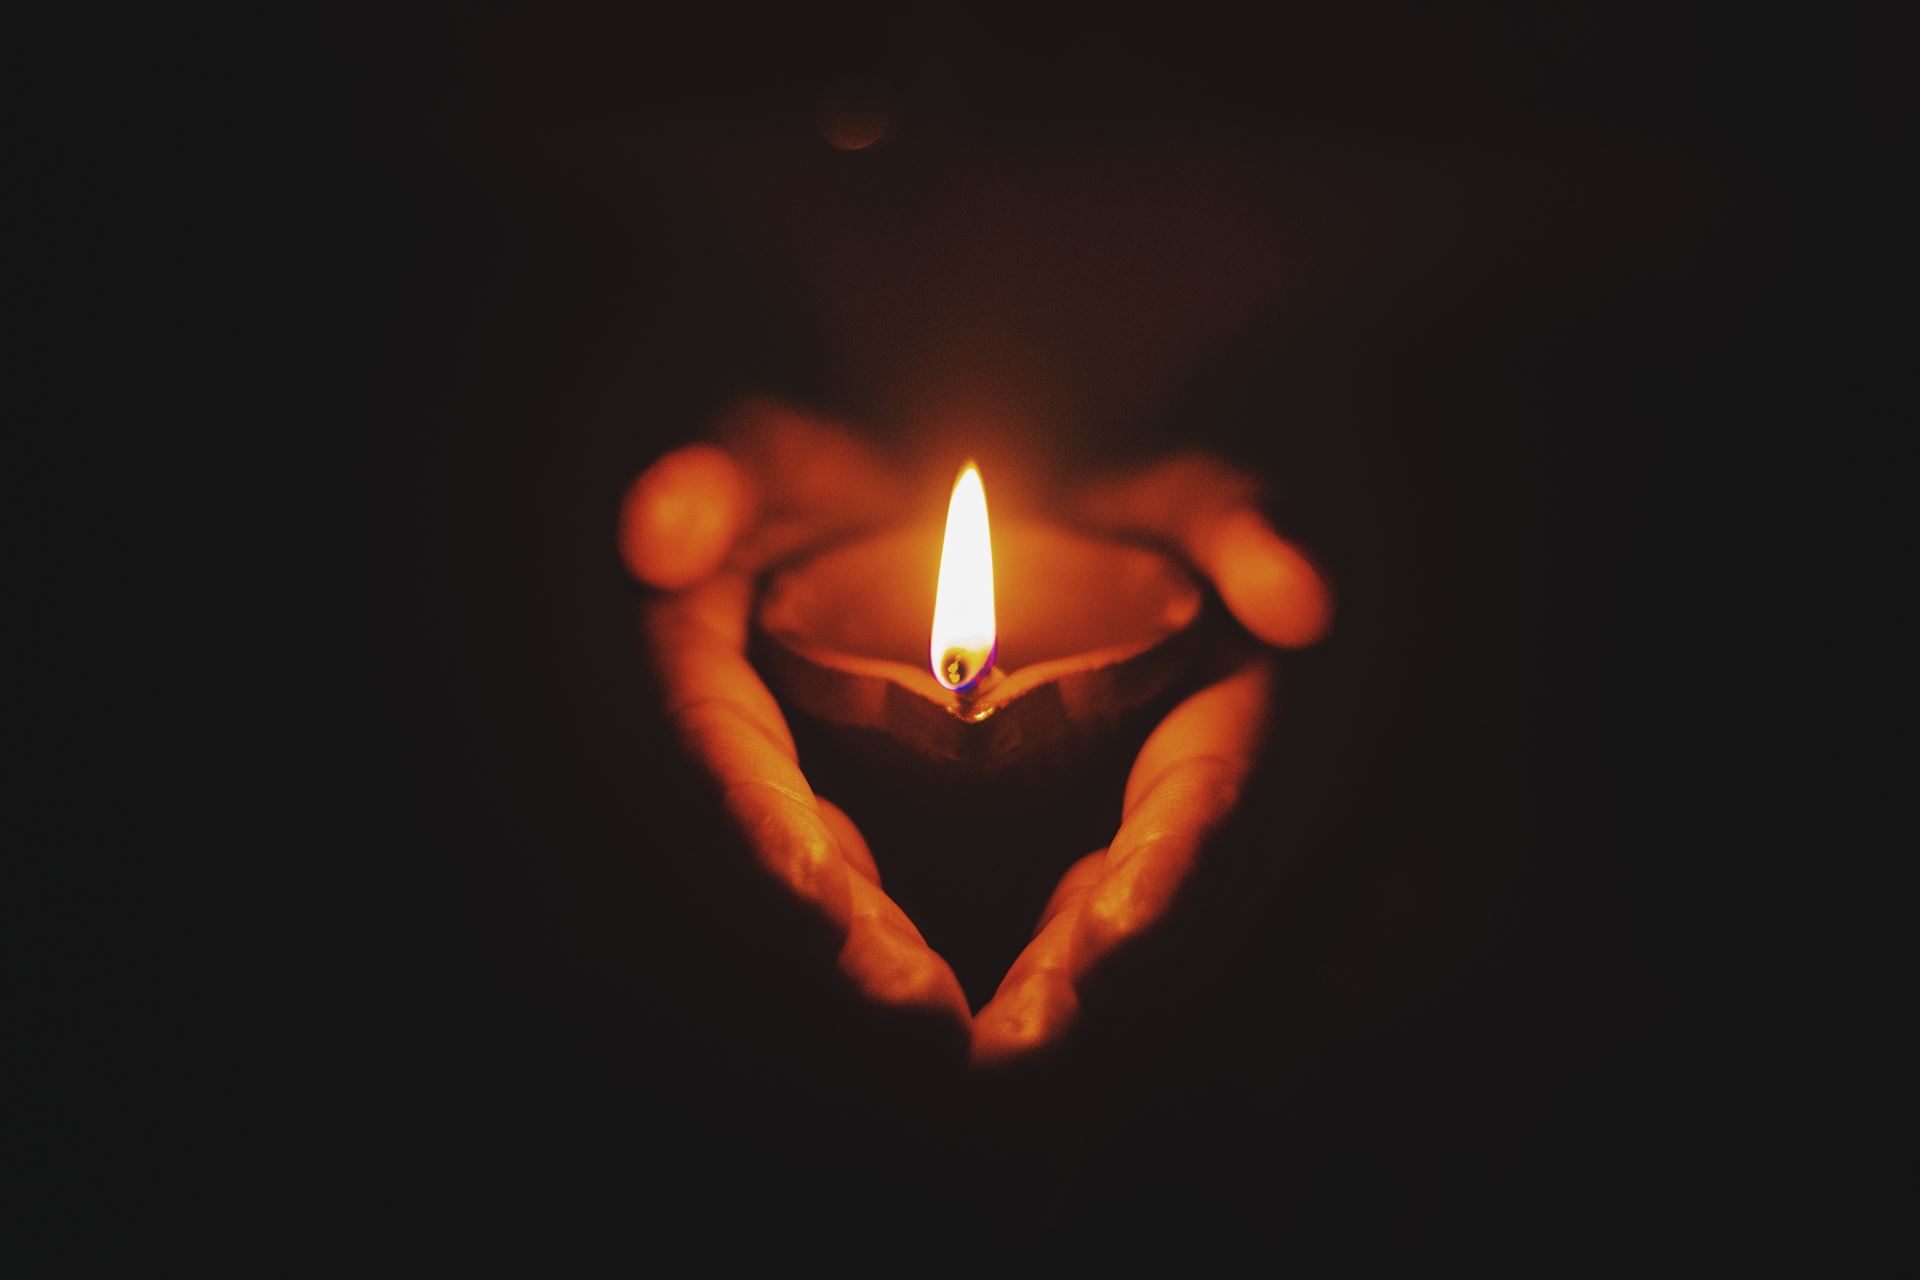 A tealight candle held in cupped hands